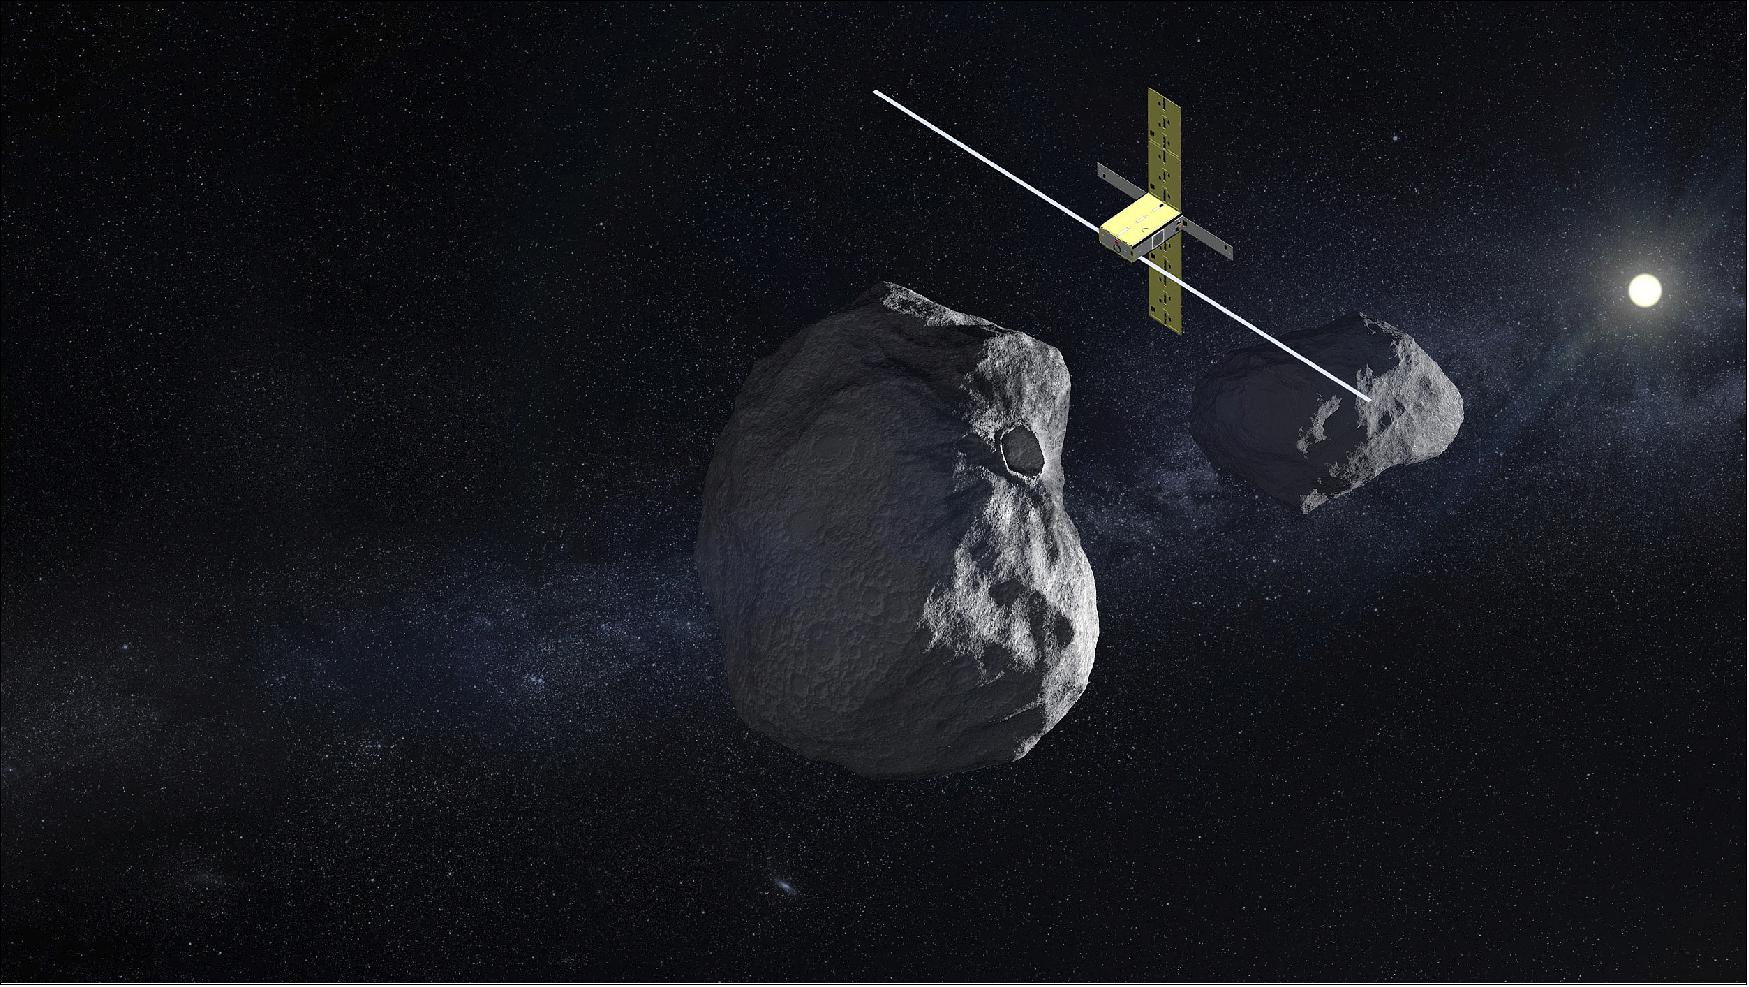 Figure 44: The Juventas CubeSat, to be delivered to the Didymos binary asteroid system by ESA's Hera mission, will carry a low-frequency radar for subsurface sounding as well as a gravimeter to measure both asteroids' gravity fields. It will also perform radio science measurements and measure the forces involved in its concluding landing on the smaller of the two asteroids, at the end of its month-long mission (image credit: ESA/GomSpace)